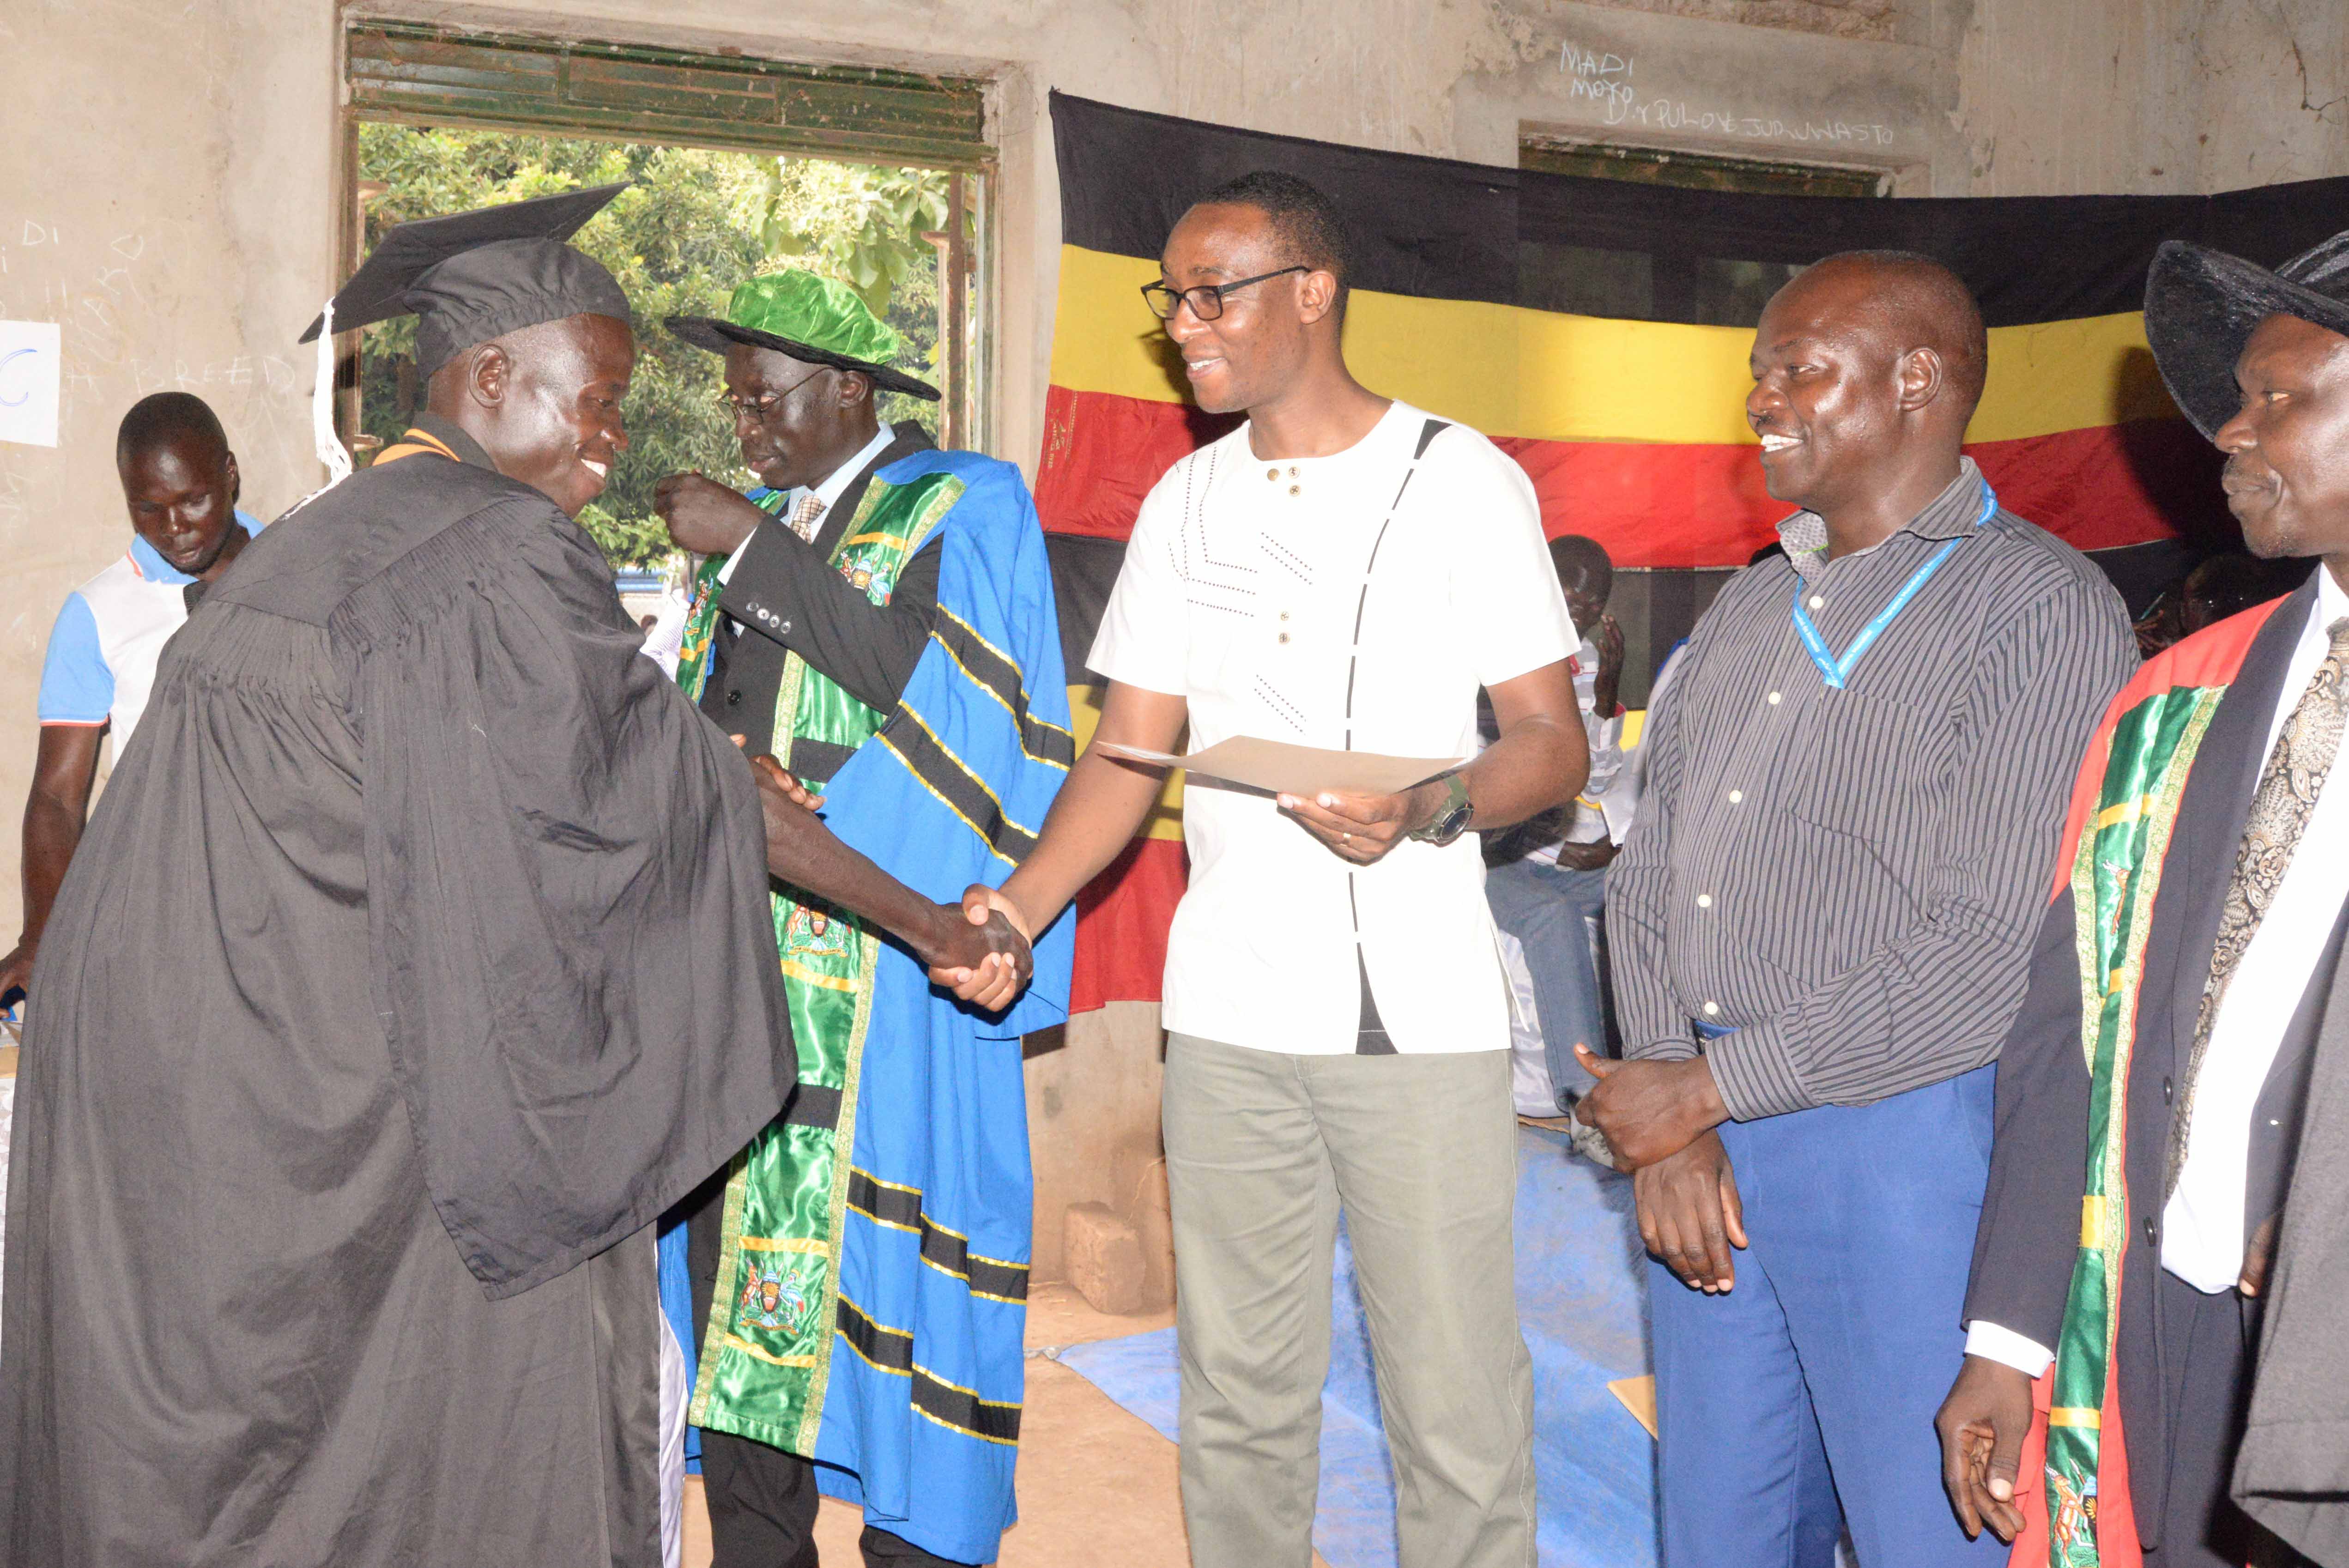 One of the beneficiaries receives a certificate of completion from a World Vision staff